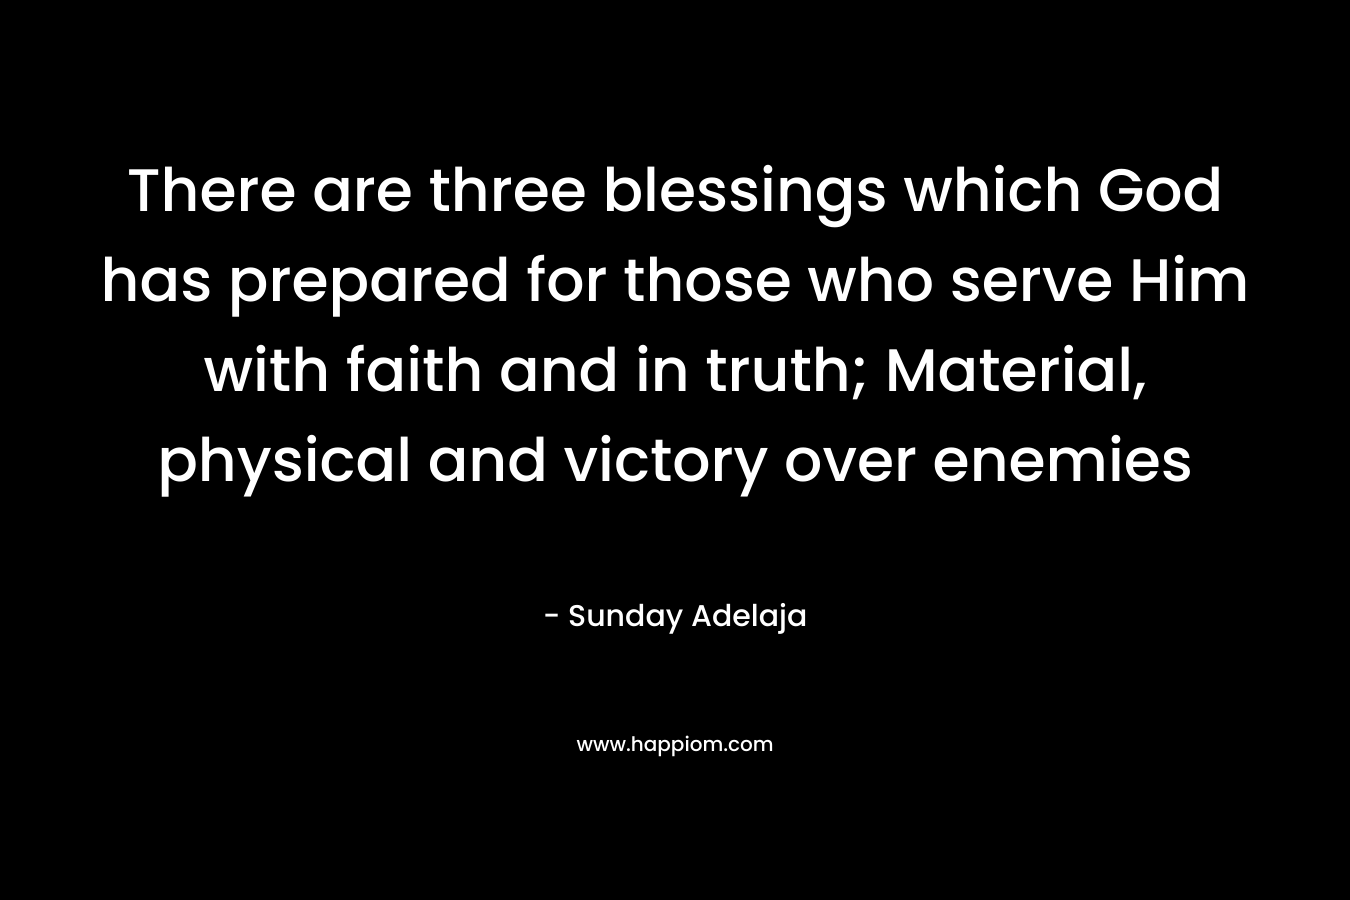 There are three blessings which God has prepared for those who serve Him with faith and in truth; Material, physical and victory over enemies